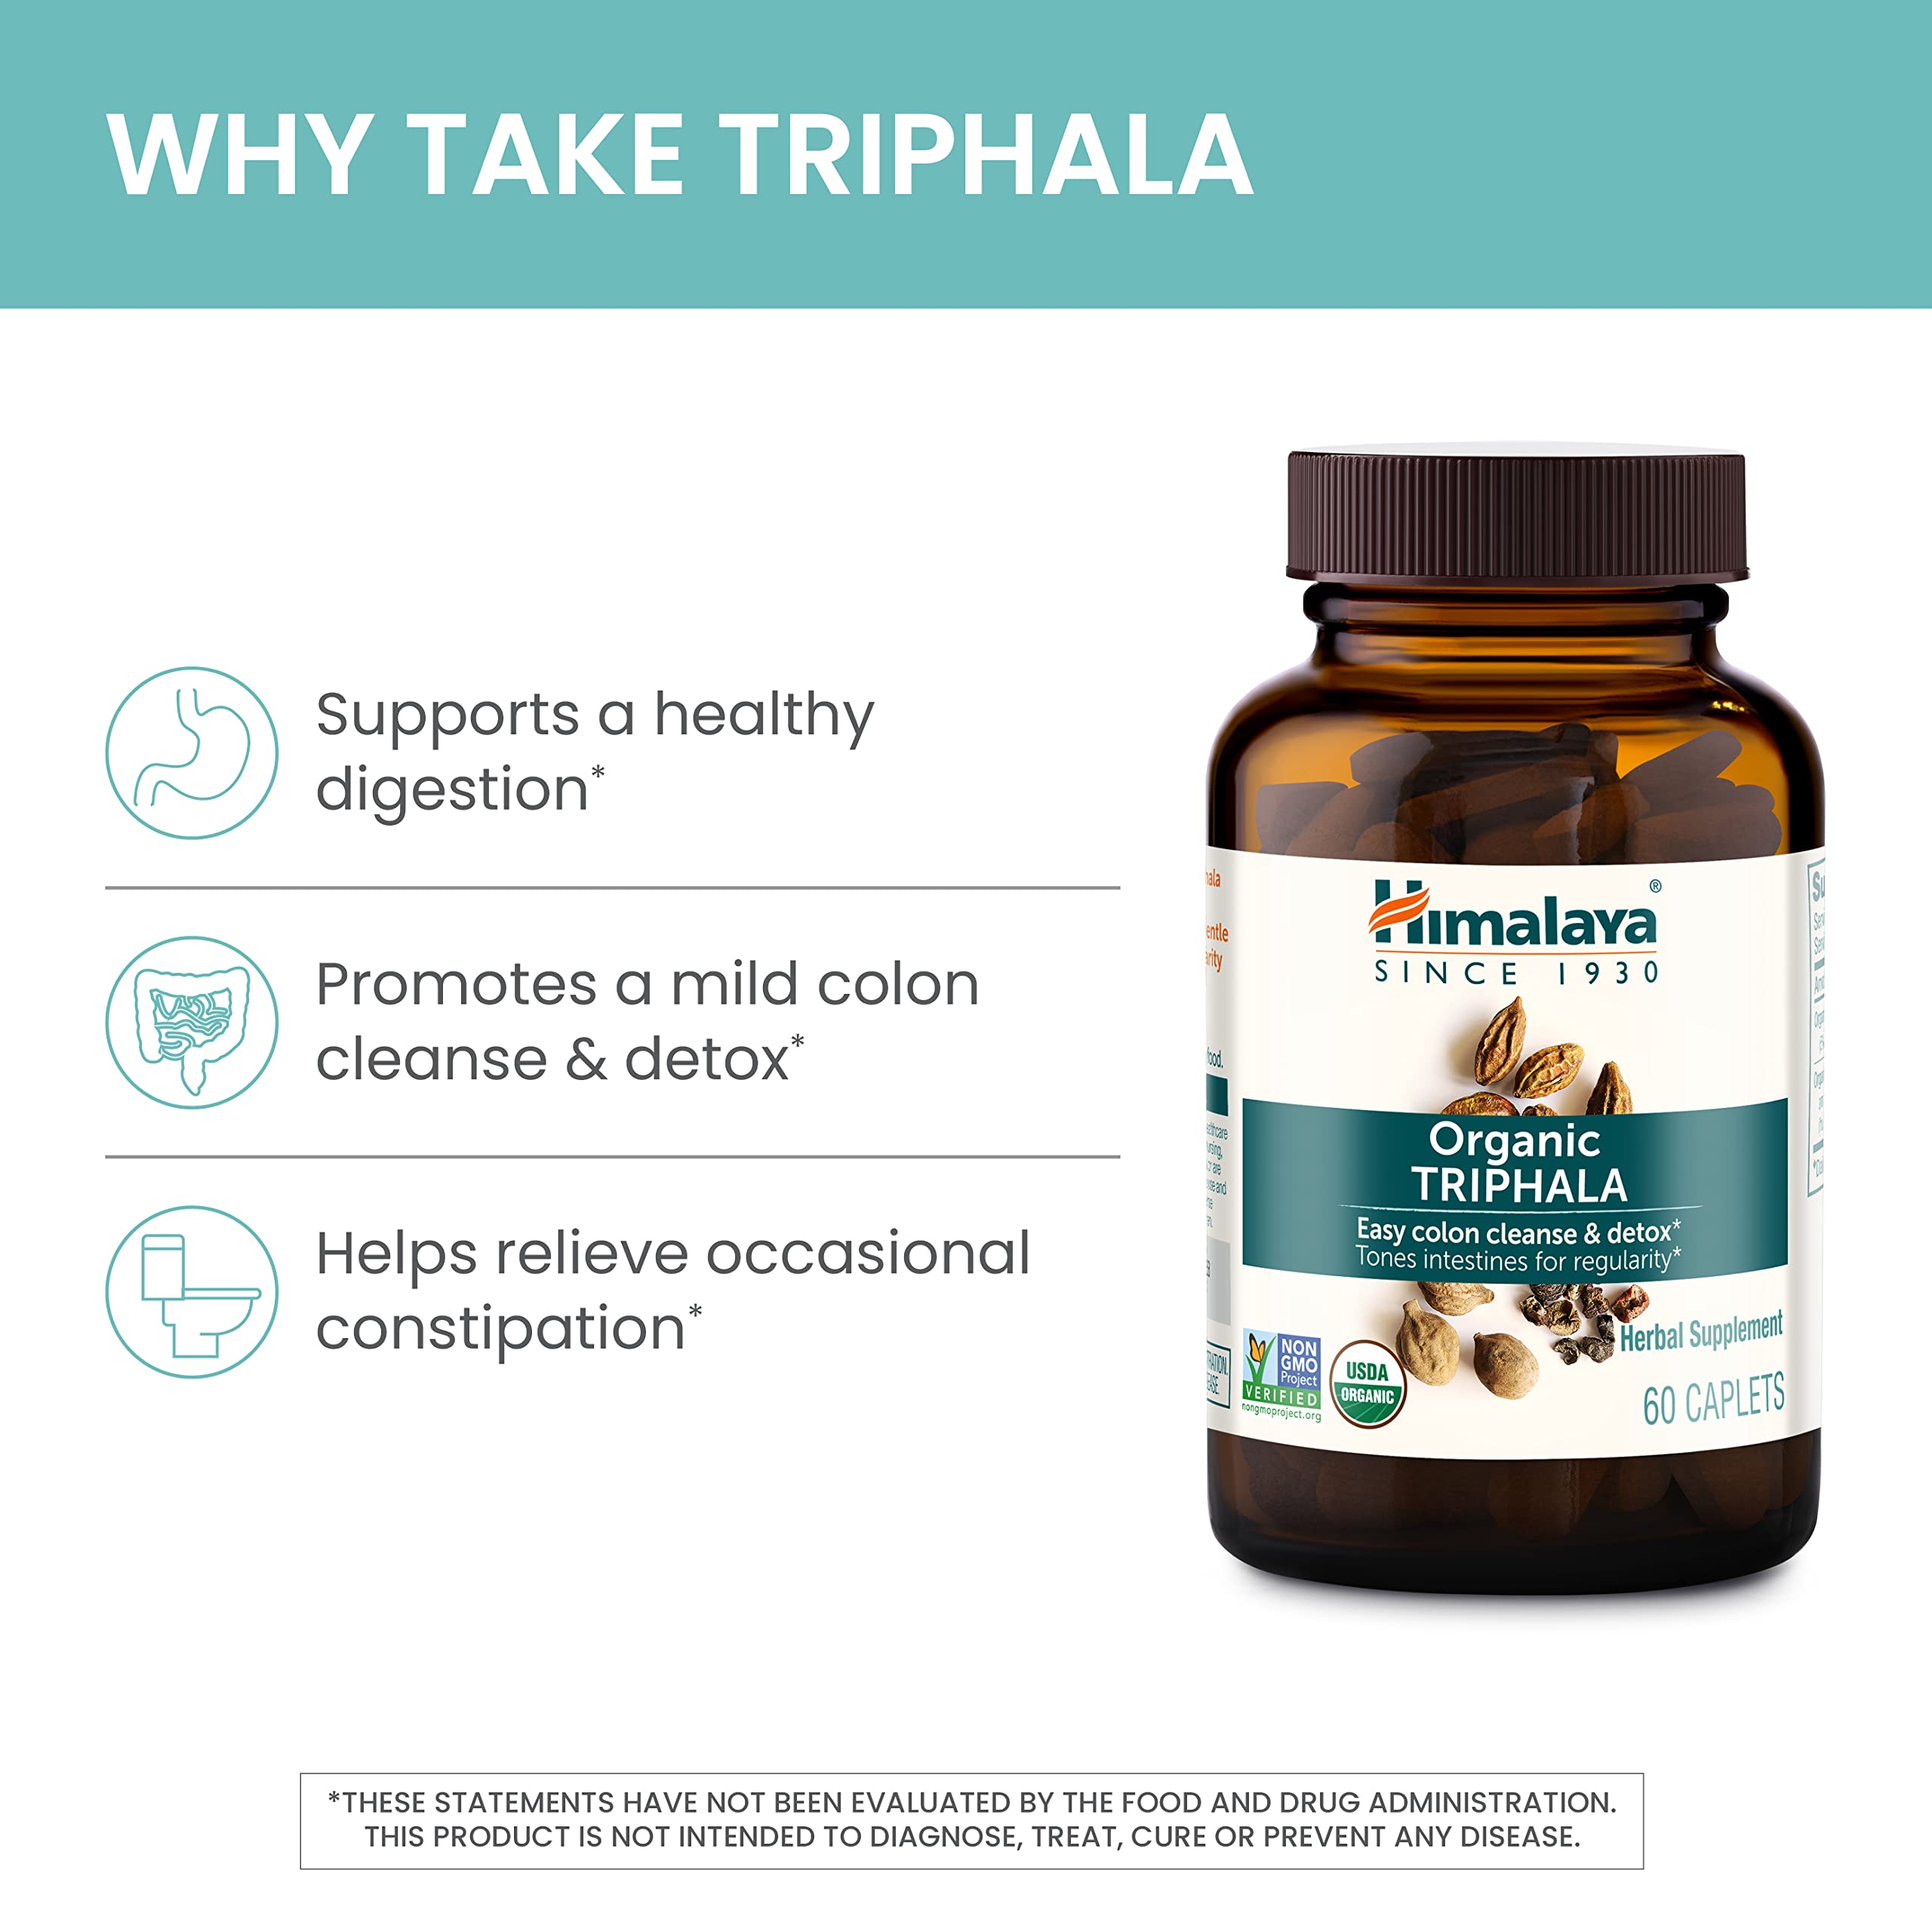 Himalaya Organic Triphala, Colon Cleanse & Digestive Supplement for Occasional Constipation, 688 mg, 60 Caplets, 2 Month Supply